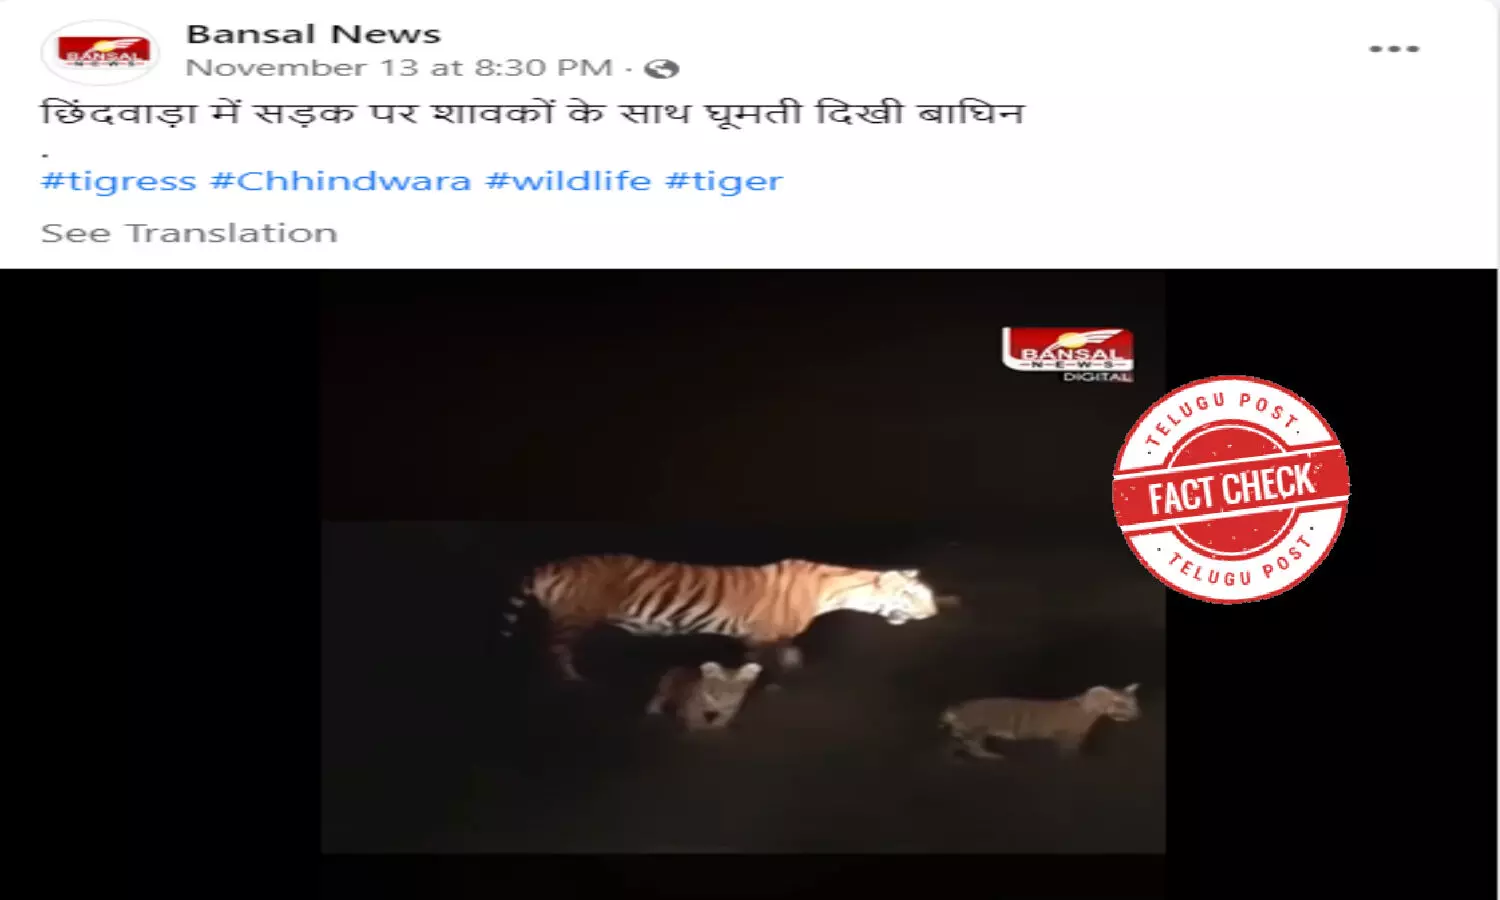 Fact Check: Viral video of a tigress and its cubs is from Dudhwa Tiger Reserve in UP, not MP as being claimed